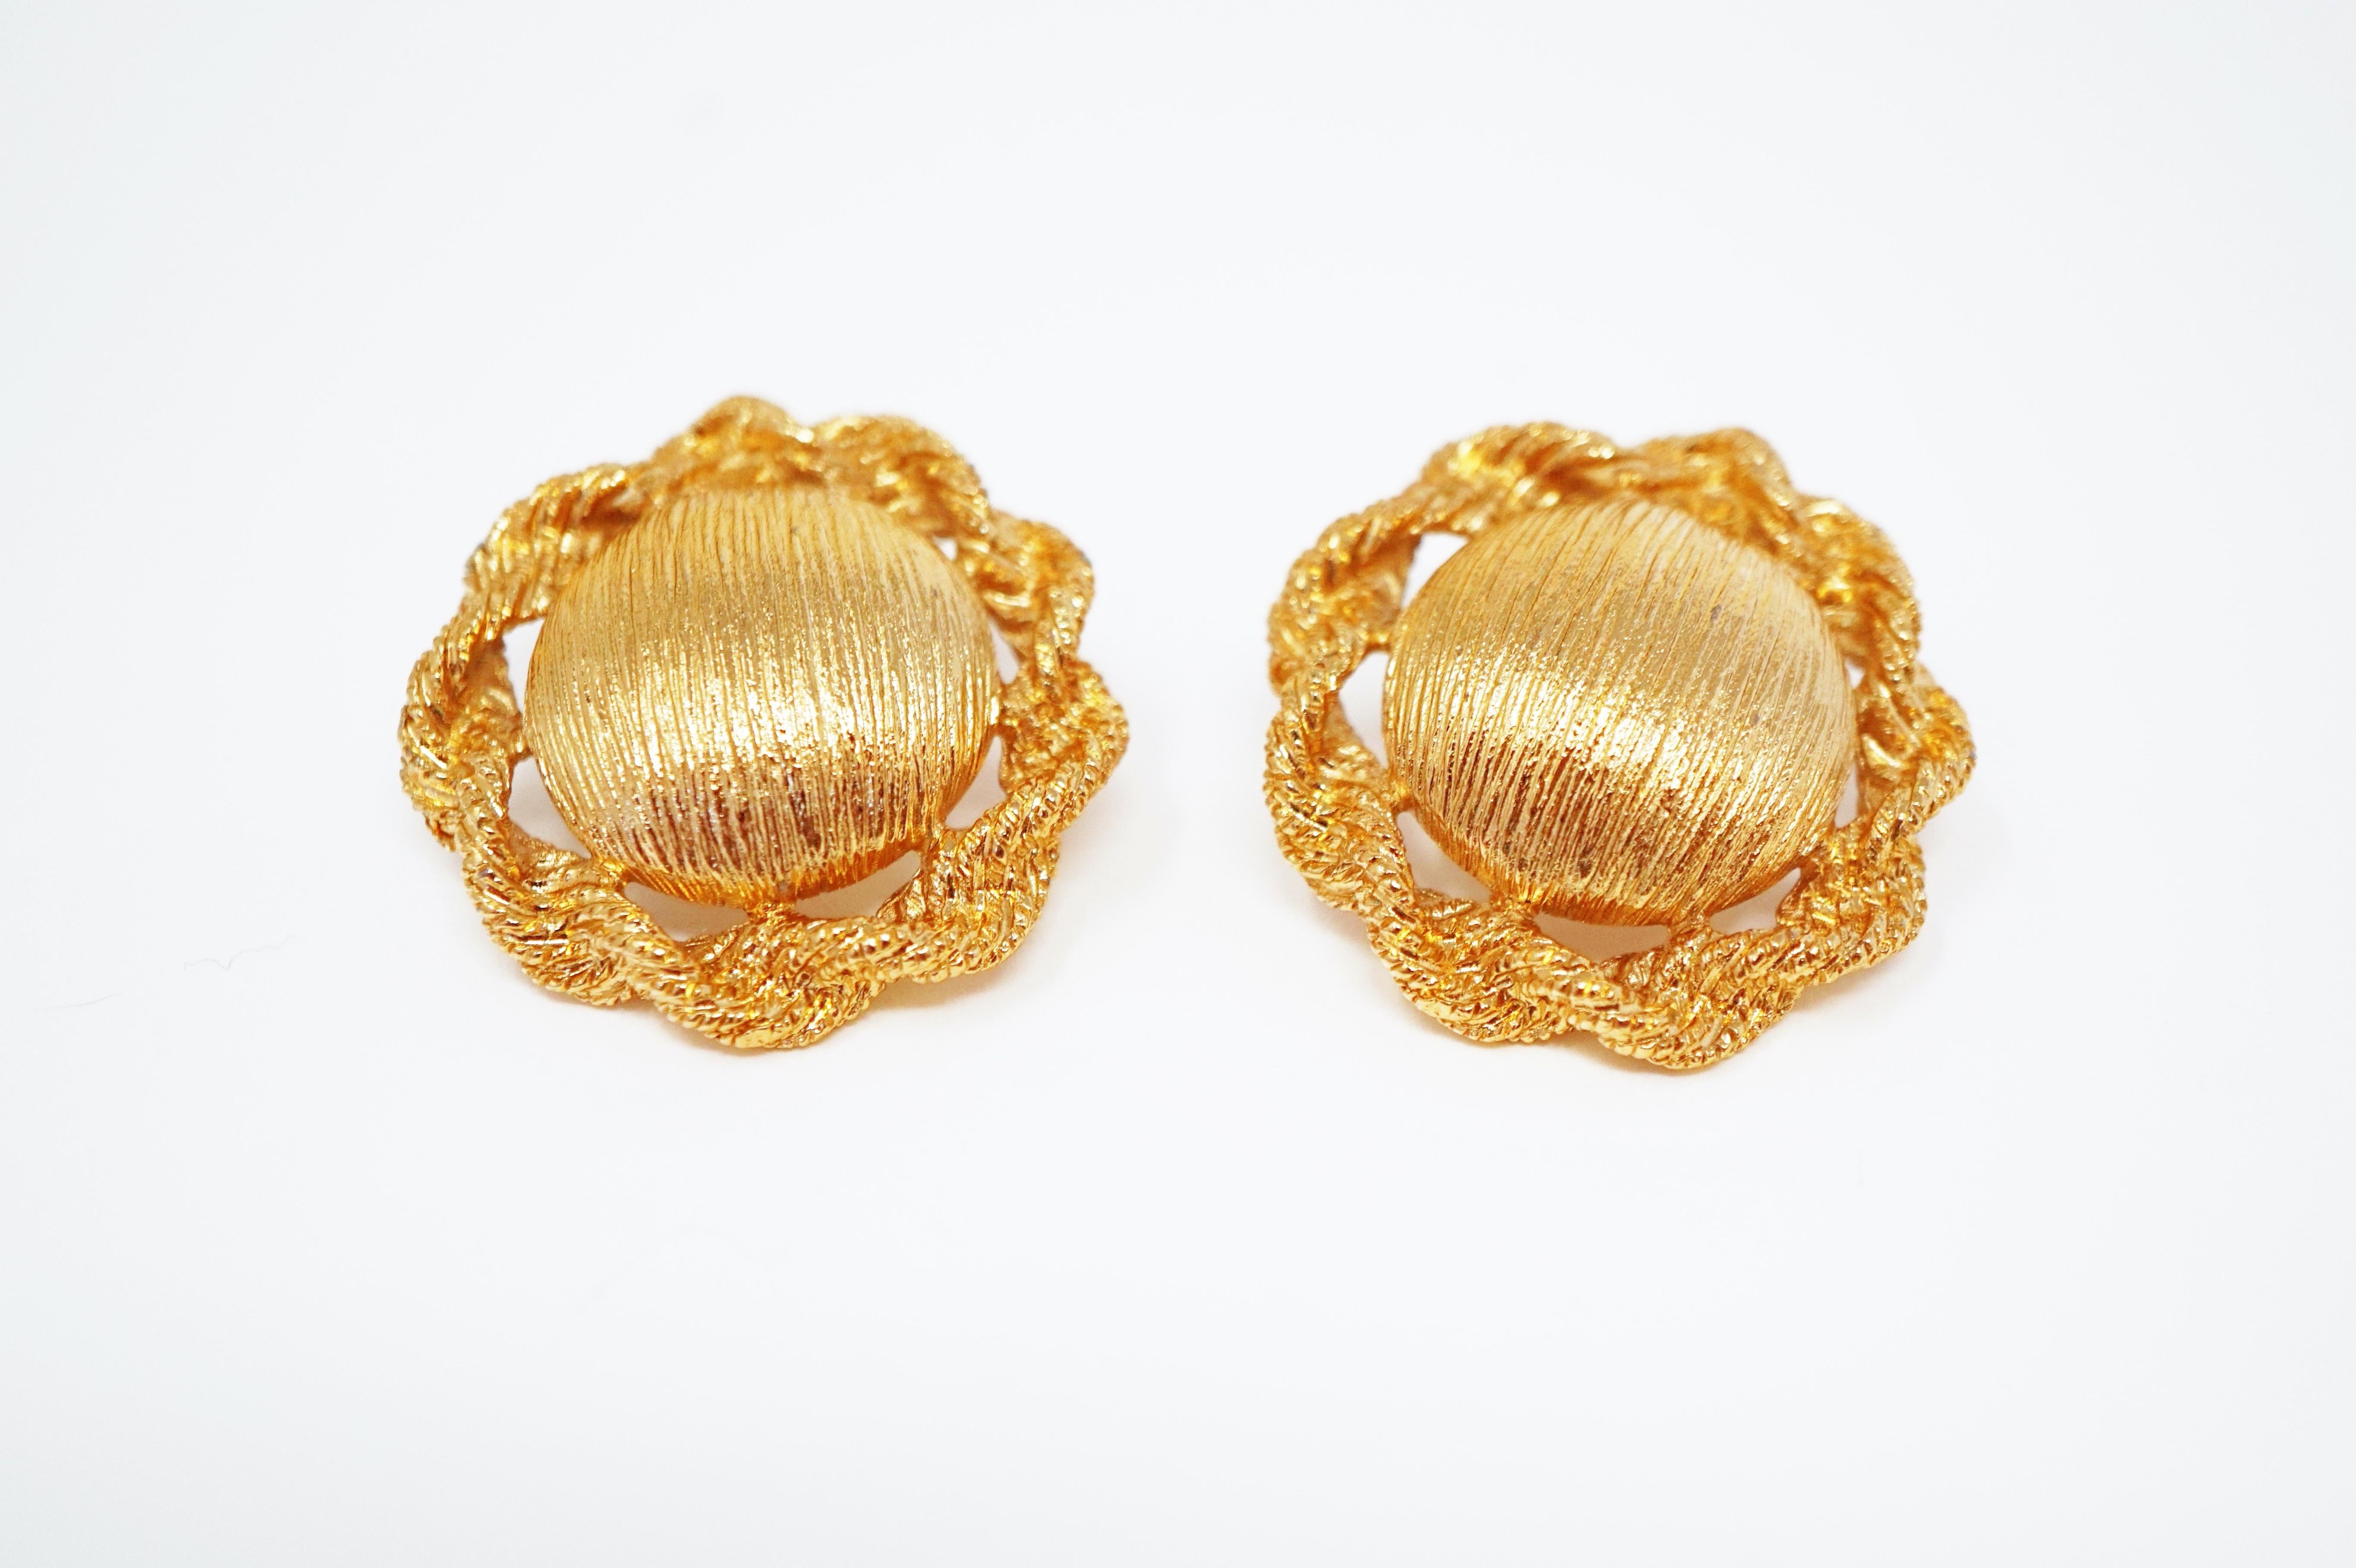 These smart statement earrings by Monet, circa 1955, are the perfect compliment to a tailored look. In immaculate vintage condition, these beauties would make a wonderful addition to a costume jewelry collection!

ABOUT MONET:
Monet was founded in